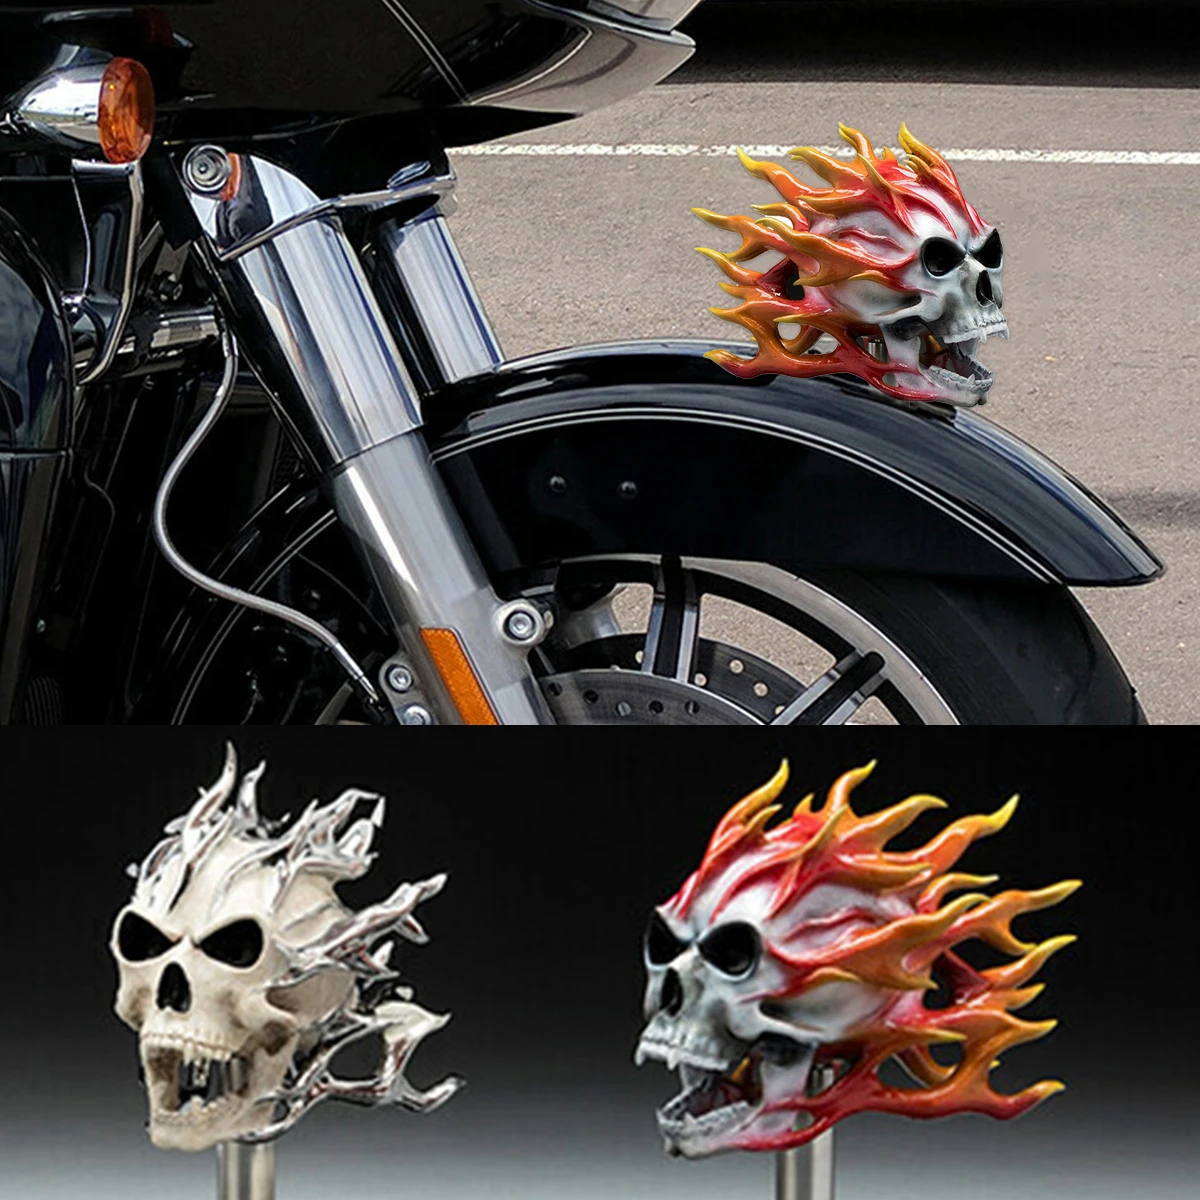 

Motorcycle Demon Ornament Skeleton Skull Decoration Undead Knight Ornament Car Bicycles Accessories Dashboard Decorations